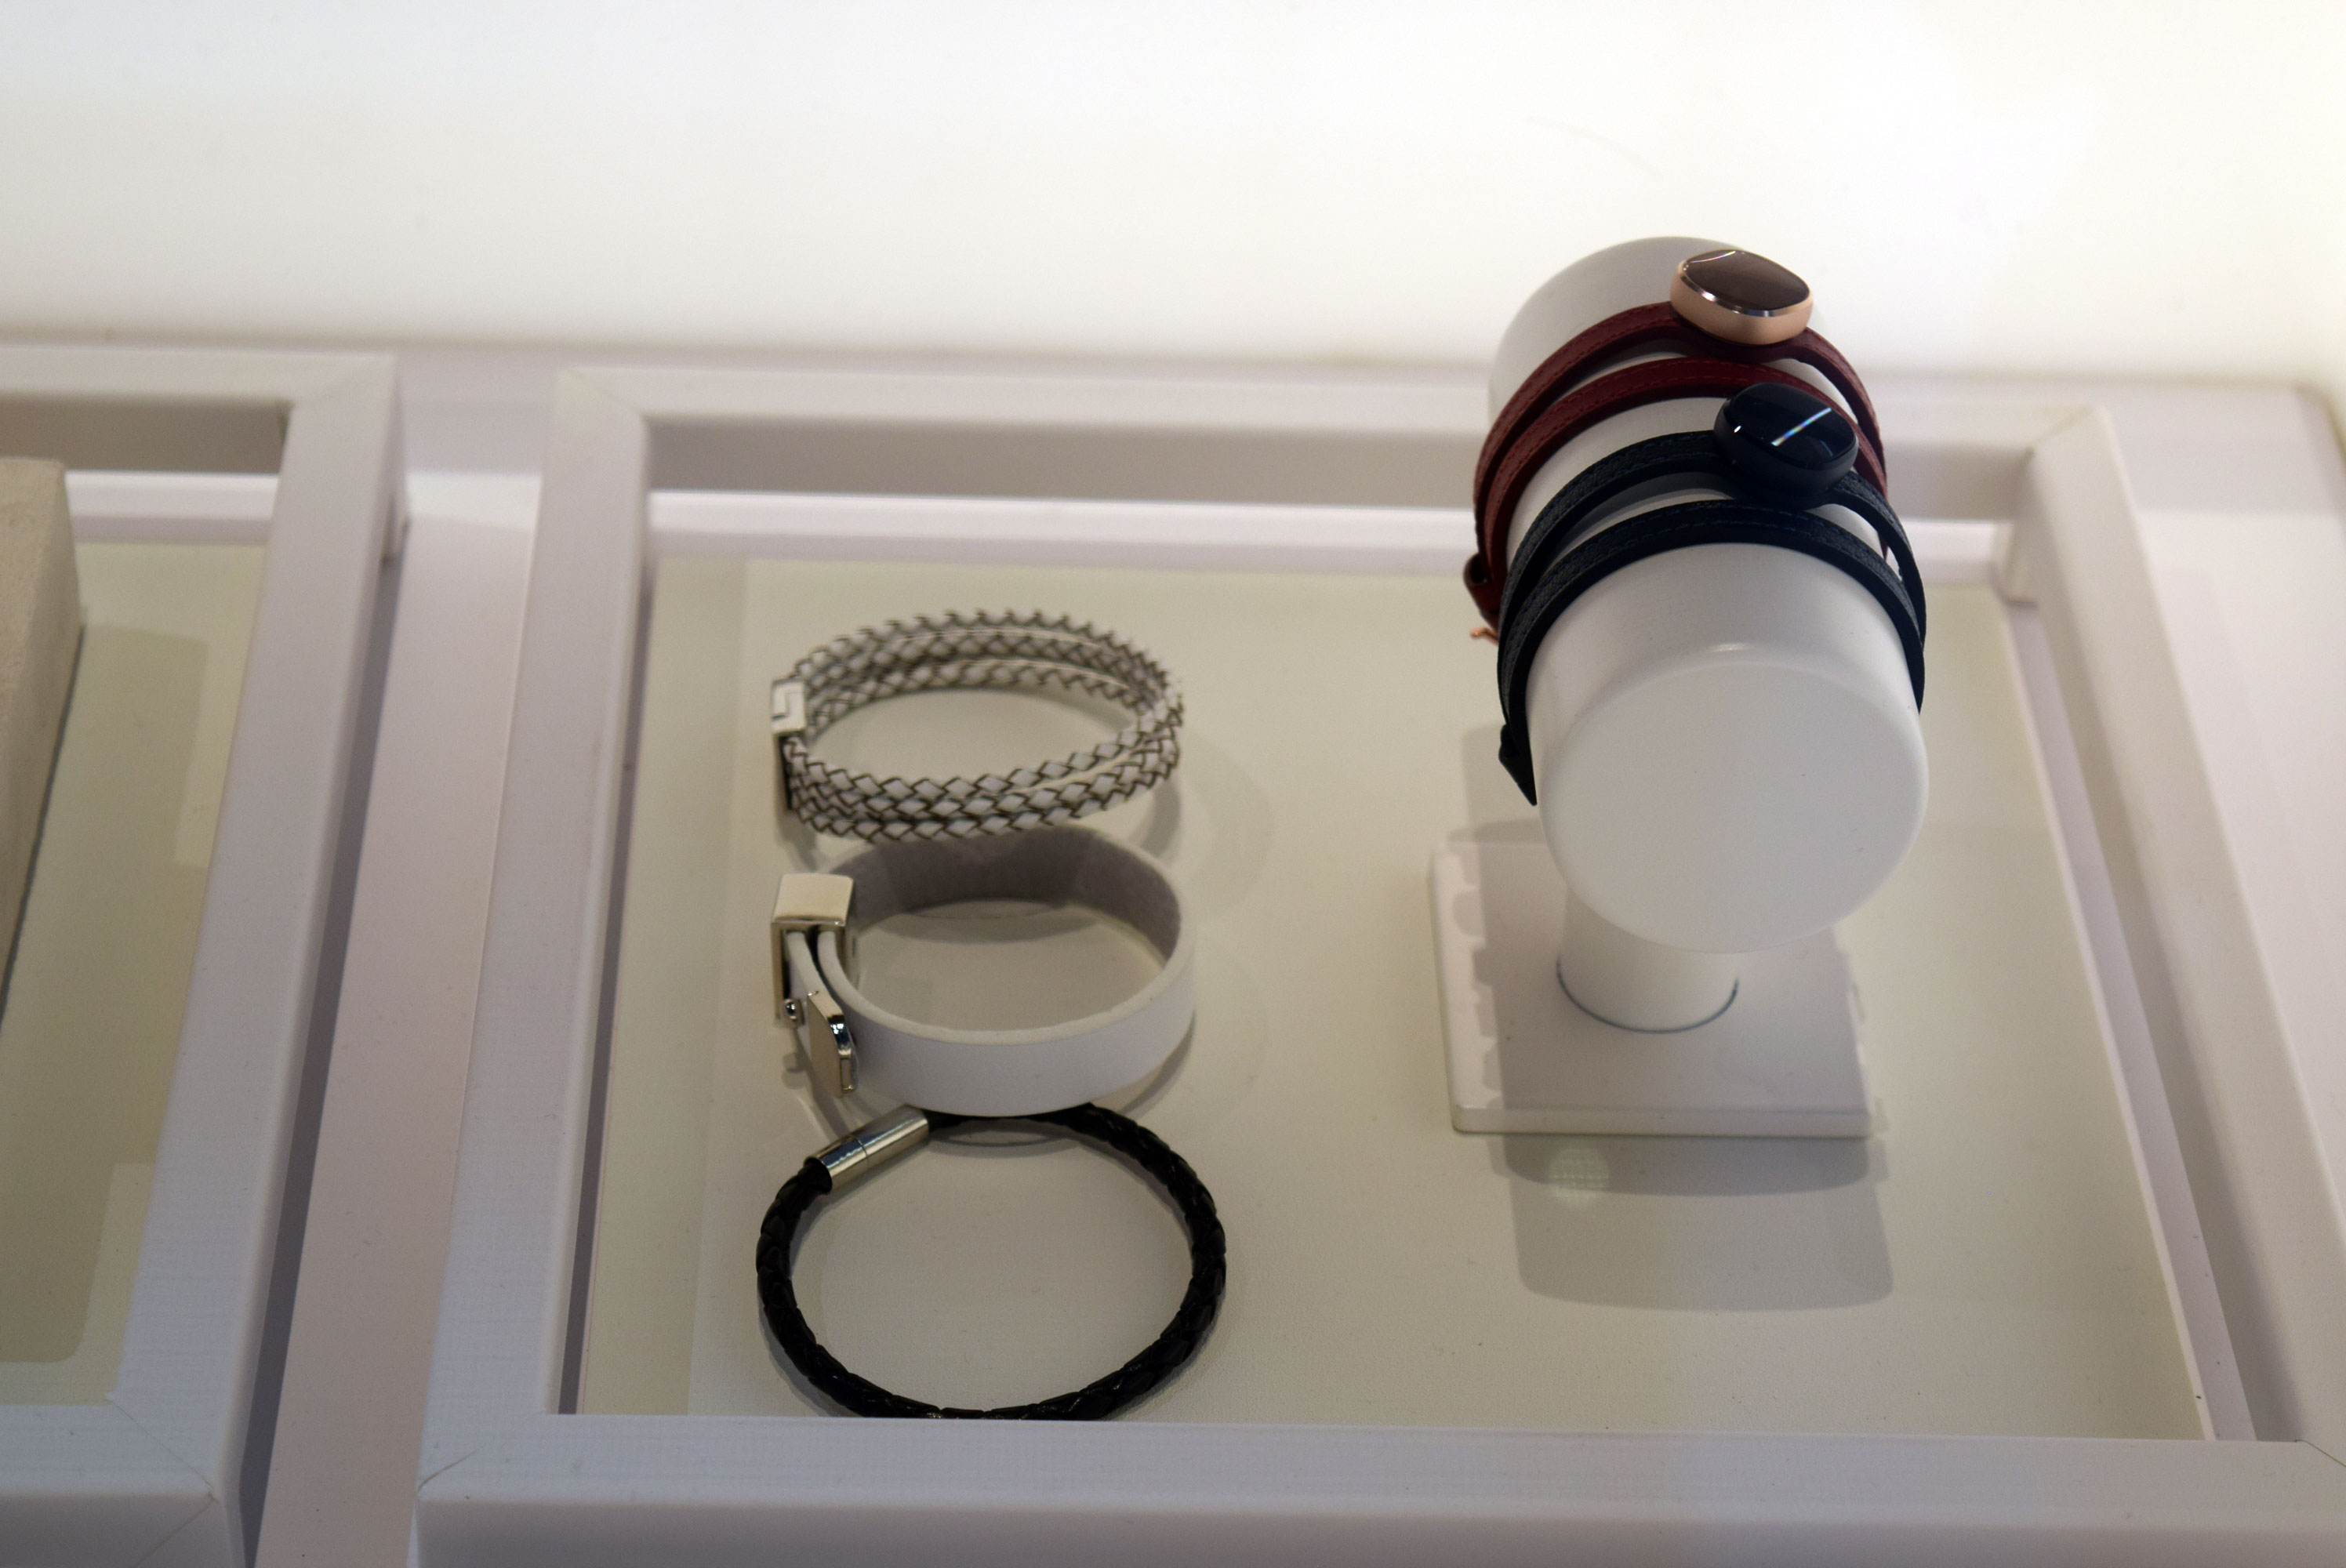 samsung fitness wearable jewelry concept prototype 0011